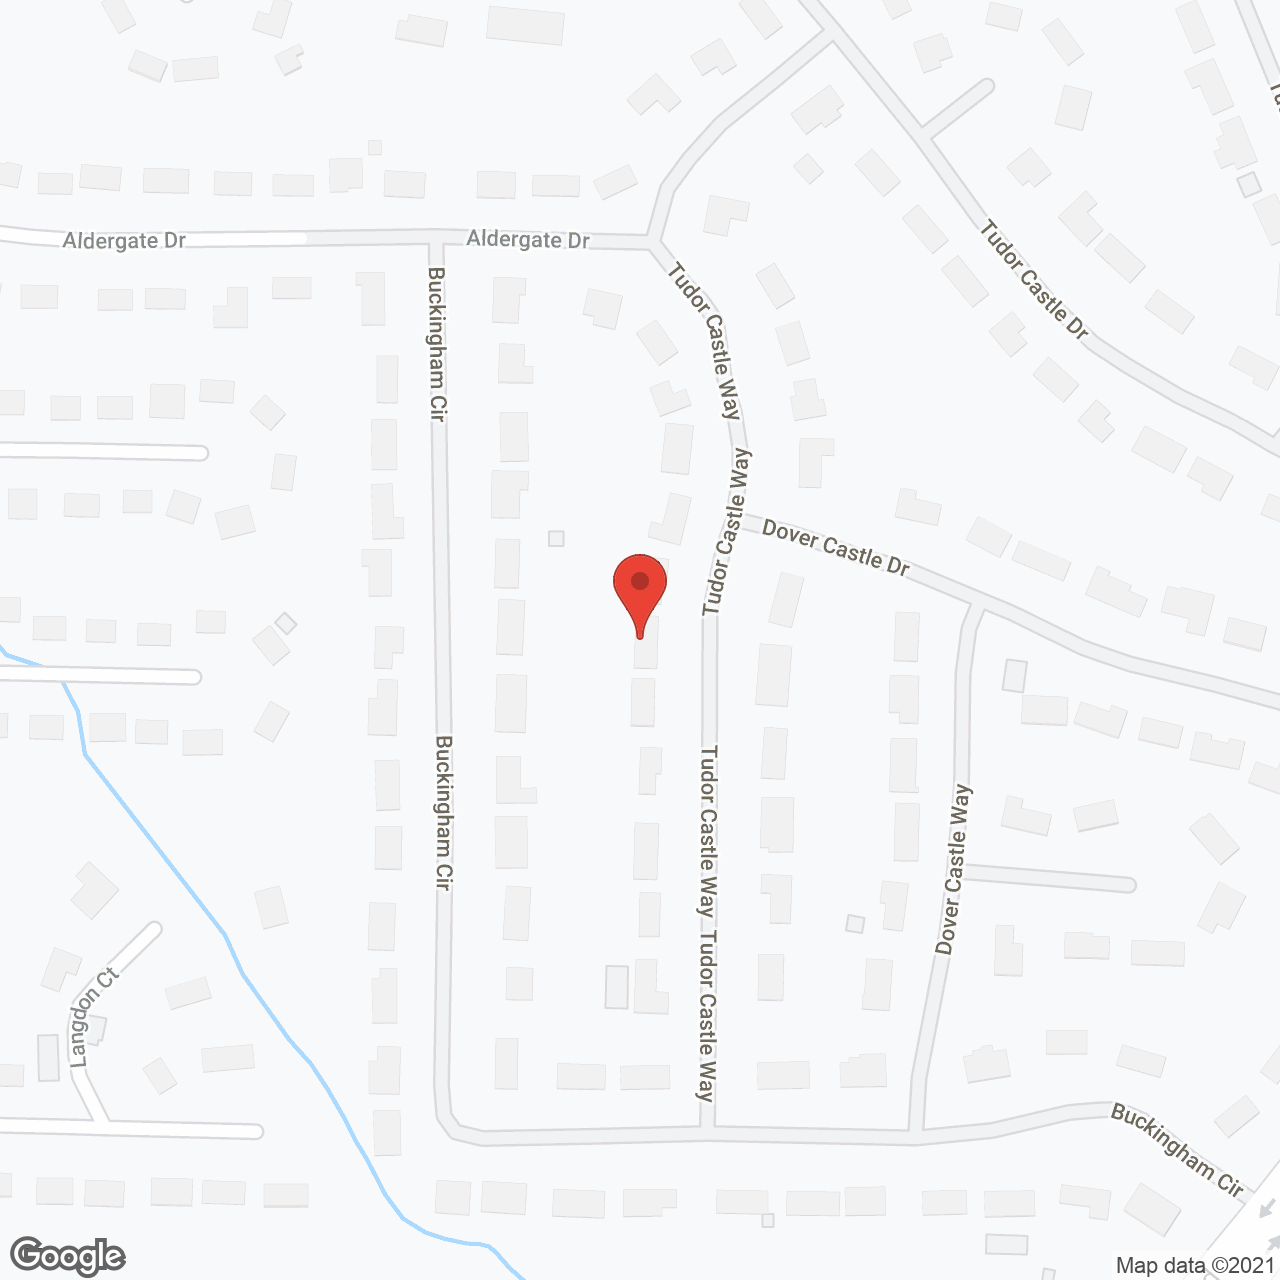 People's First Personal Care Home in google map